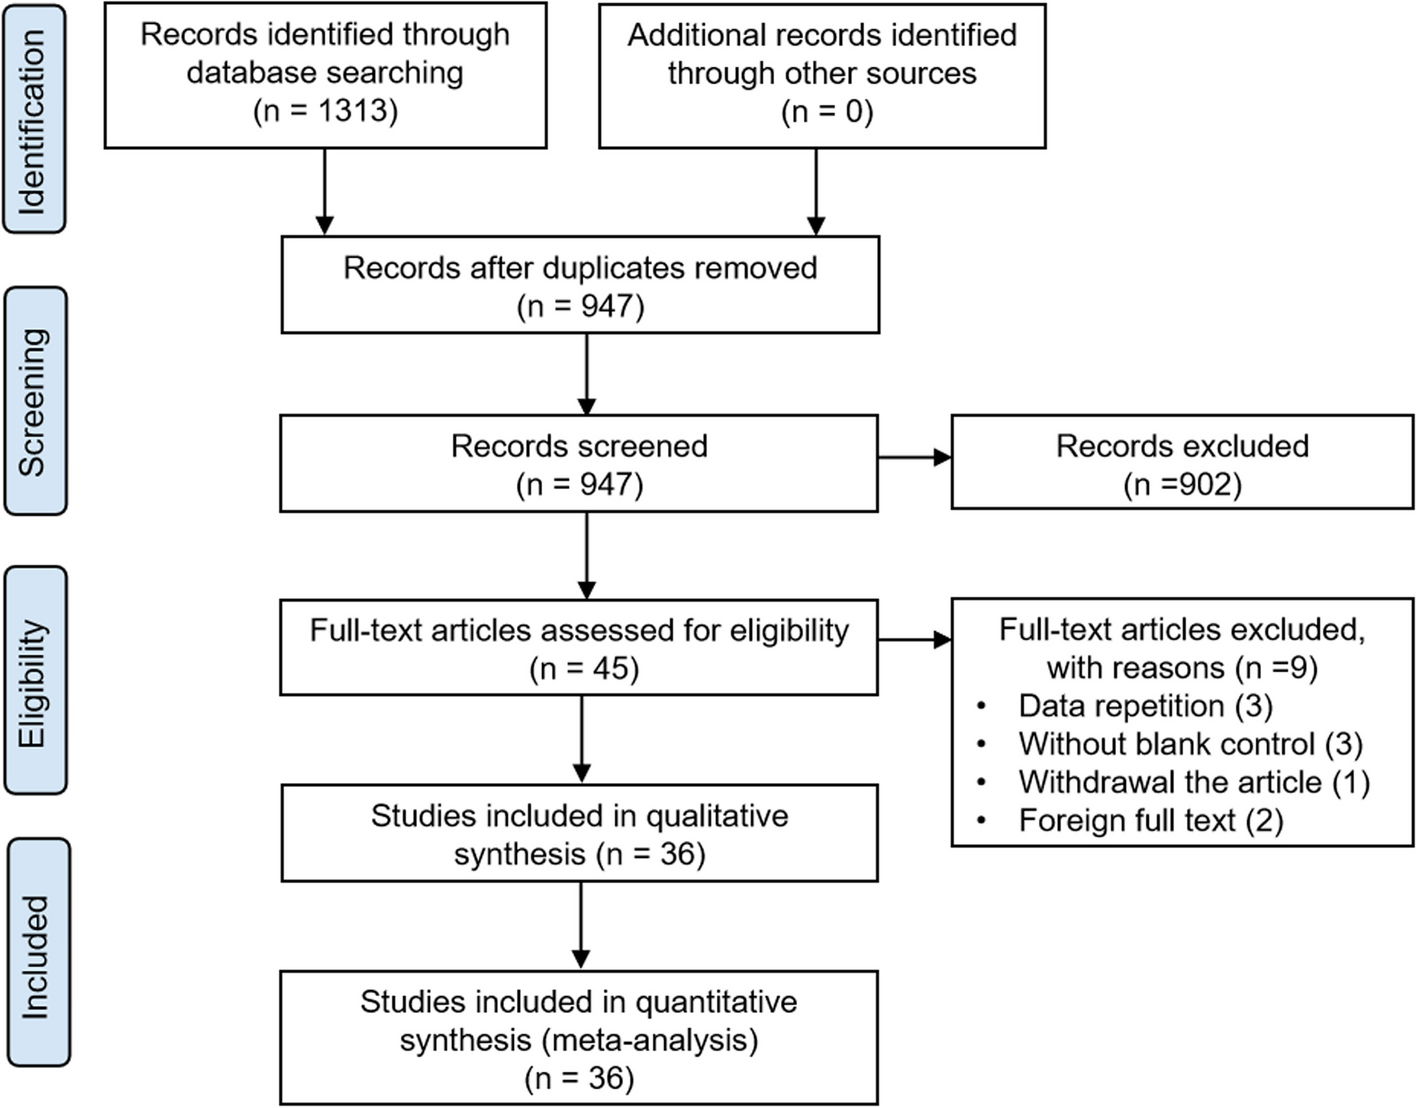 The efficacy and safety of perioperative glucocorticoid for total knee arthroplasty: a systematic review and meta-analysis